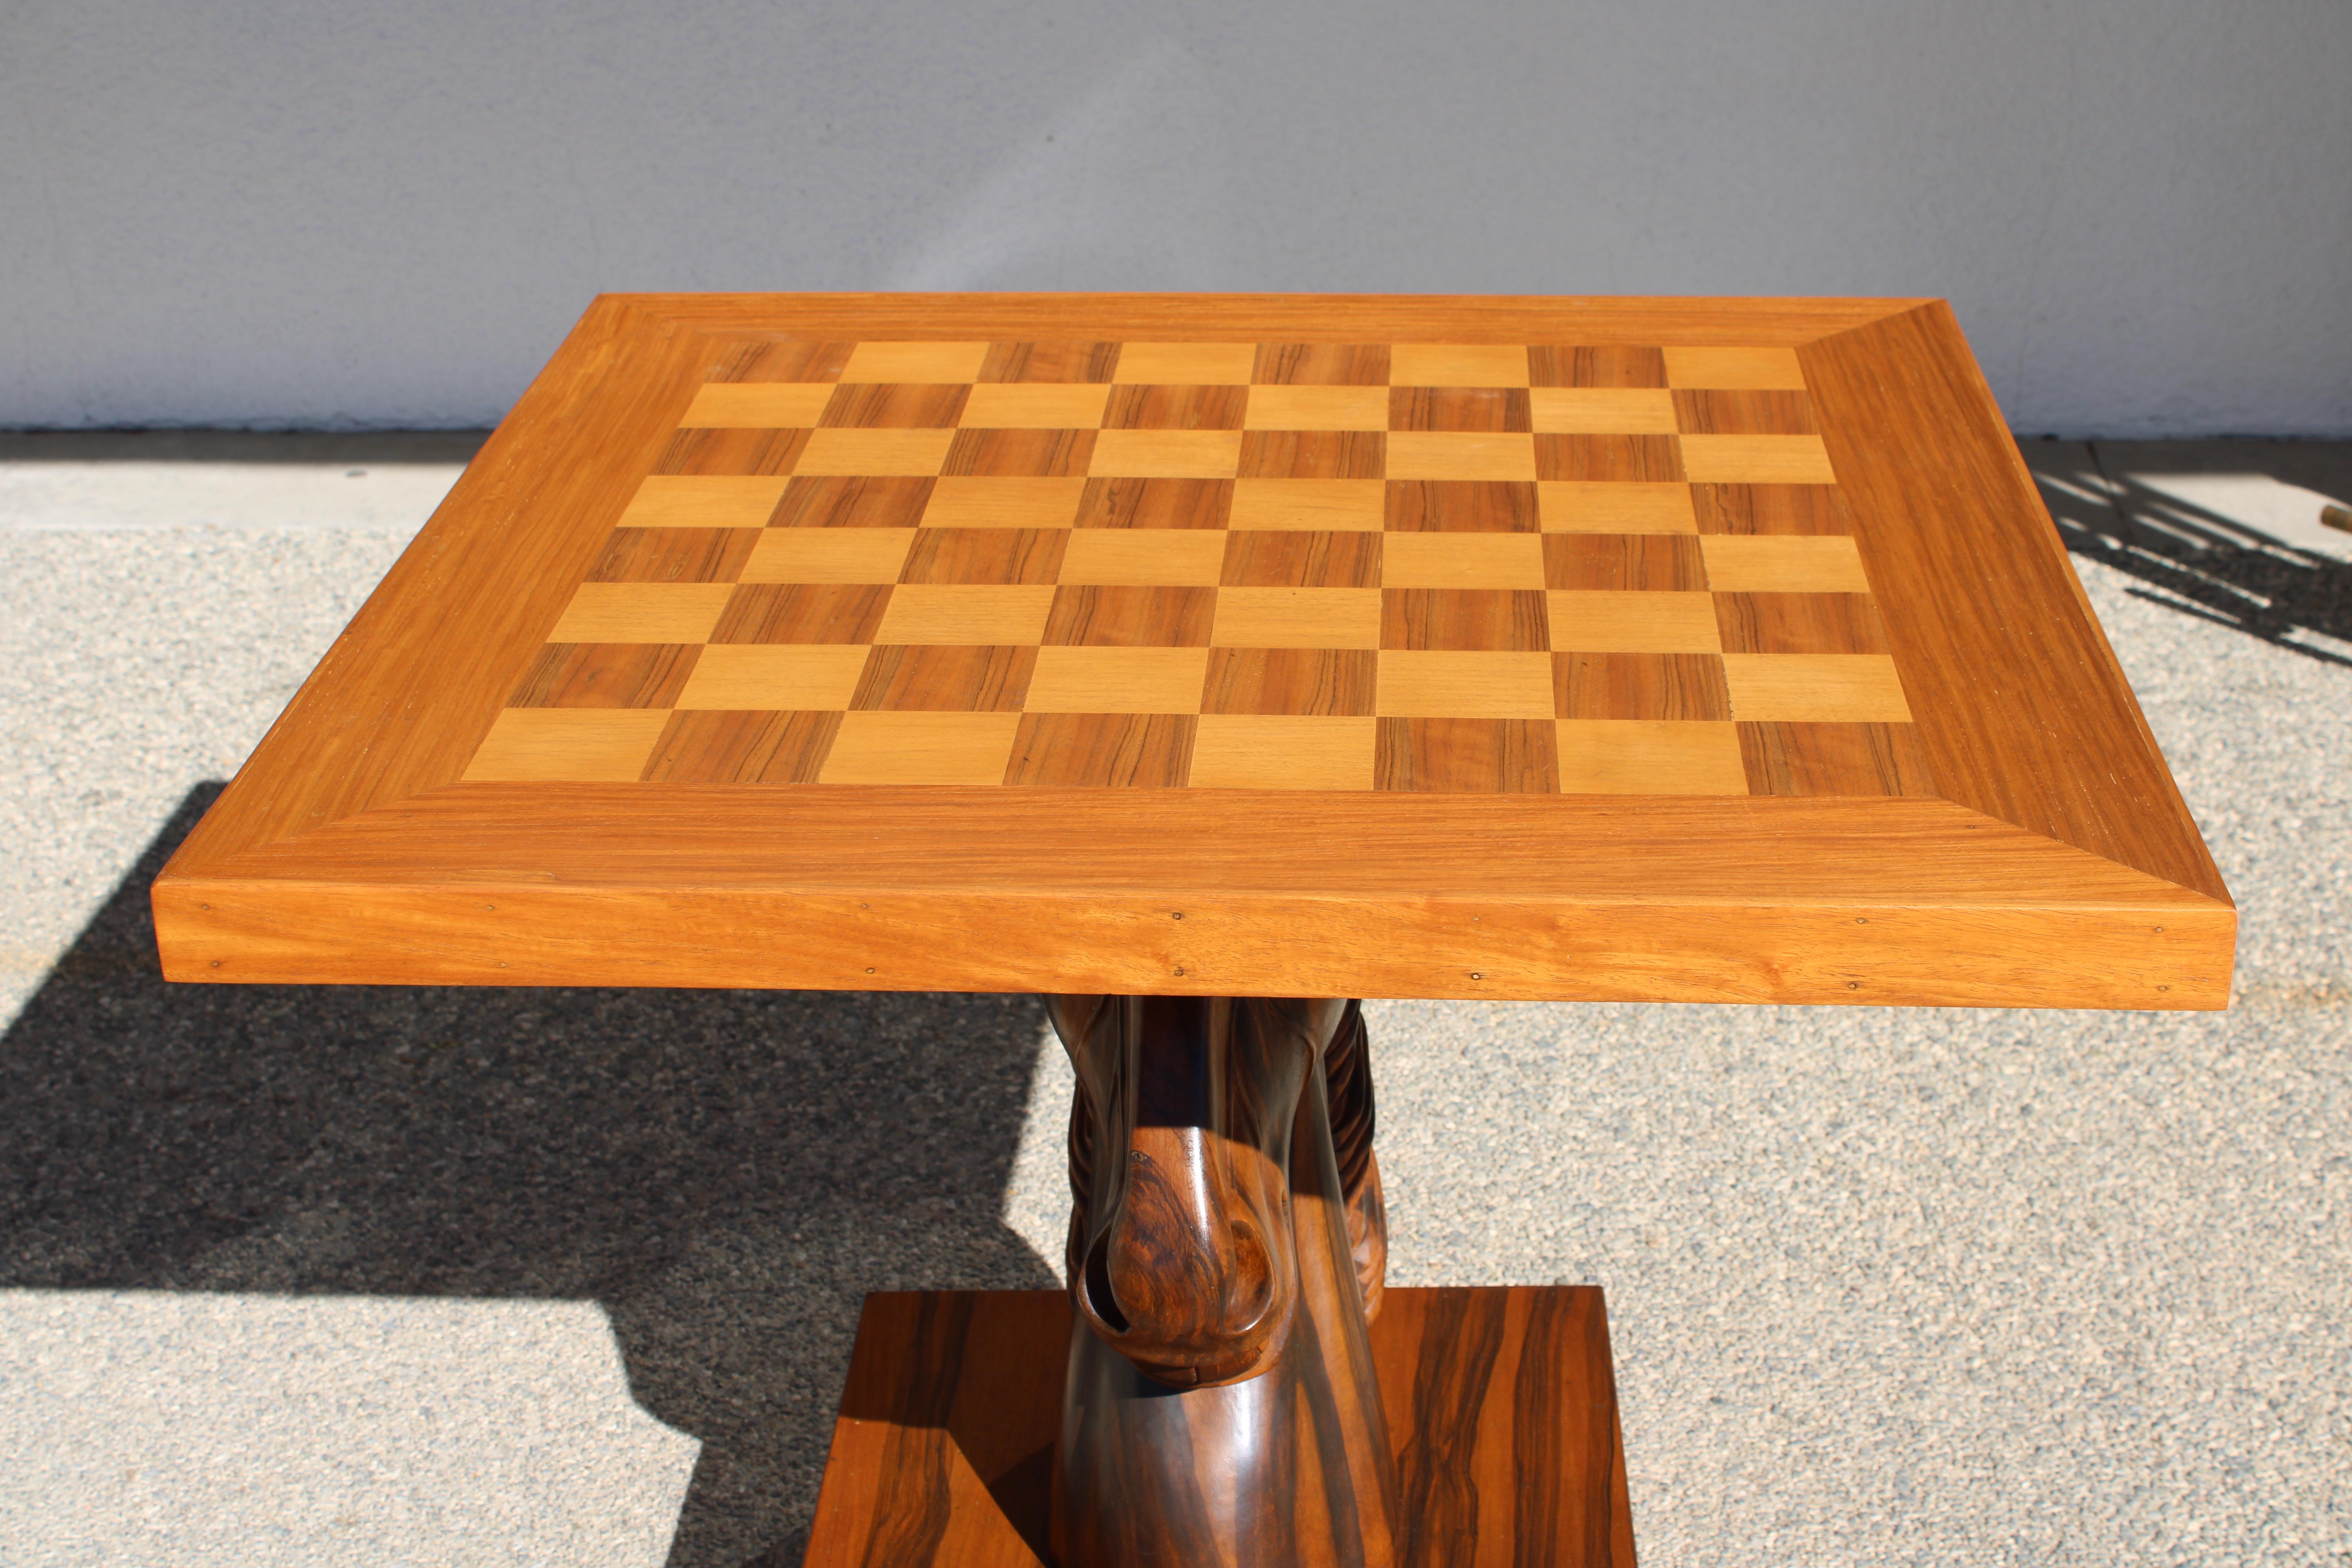 Complete chess table with chess pieces.  Table base and top has been professionally refinished.  Top is 31.75